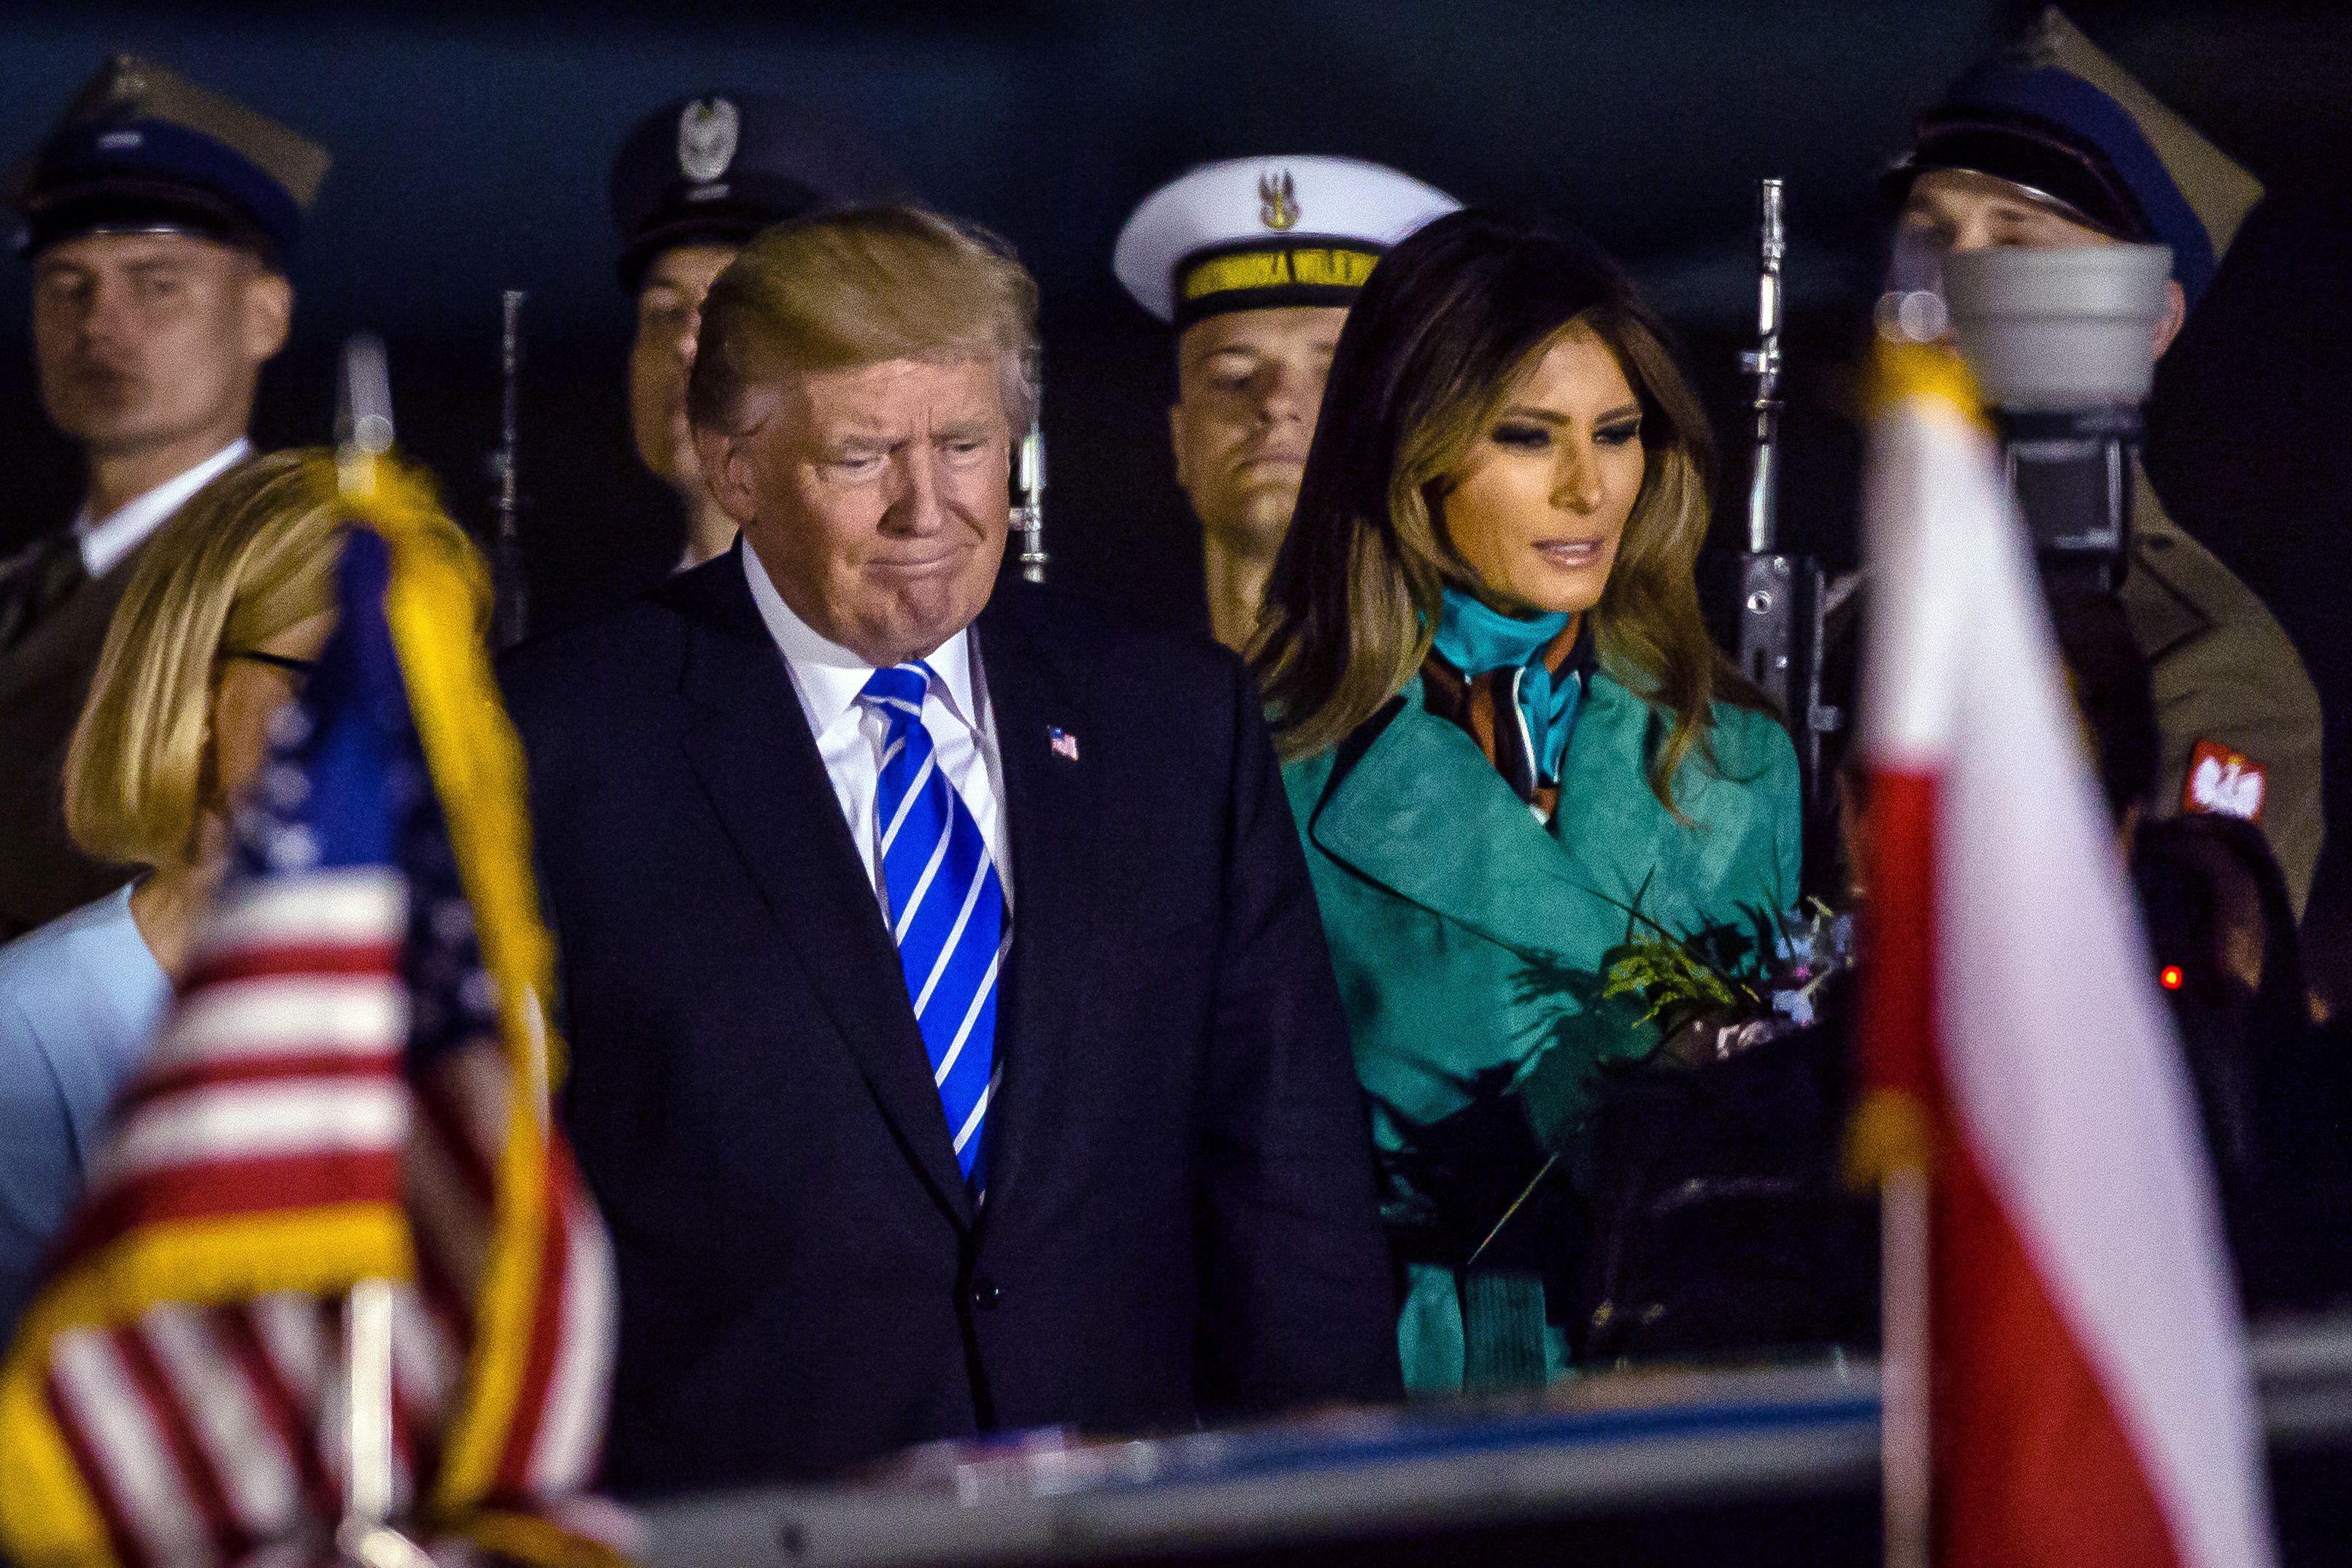 US President Donald Trump (L) and US First Lady Melania Trump (R) react after stepping off Air Force One upon their arrival at Chopin Airport in Warsaw,on July 5, 2017 (WOJTEK RADWANSK—AFP/Getty Images)